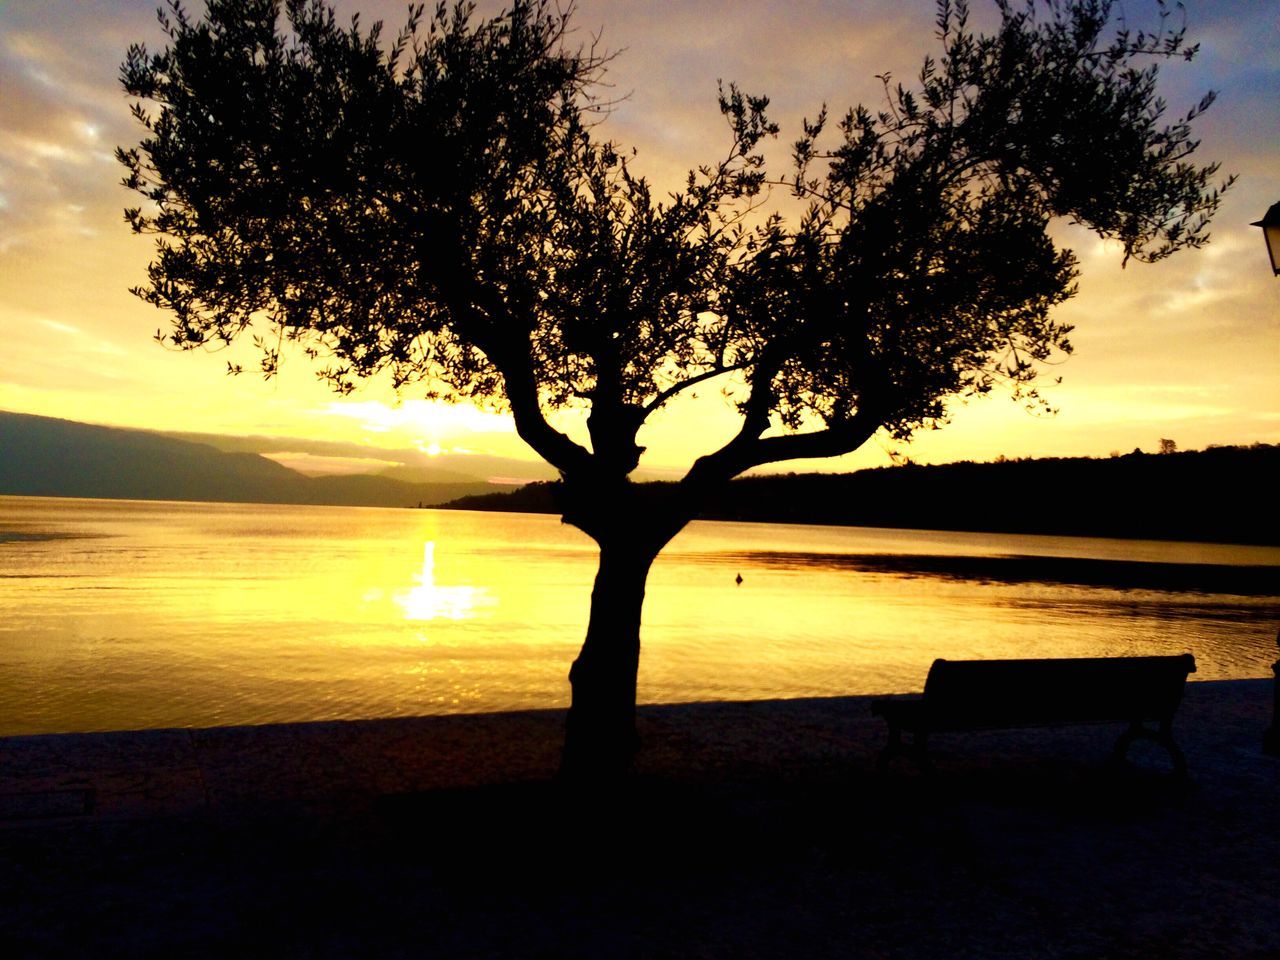 sunset, silhouette, tranquil scene, tranquility, scenics, water, beauty in nature, sun, sky, tree, nature, idyllic, sea, reflection, lake, orange color, horizon over water, tree trunk, sunlight, branch